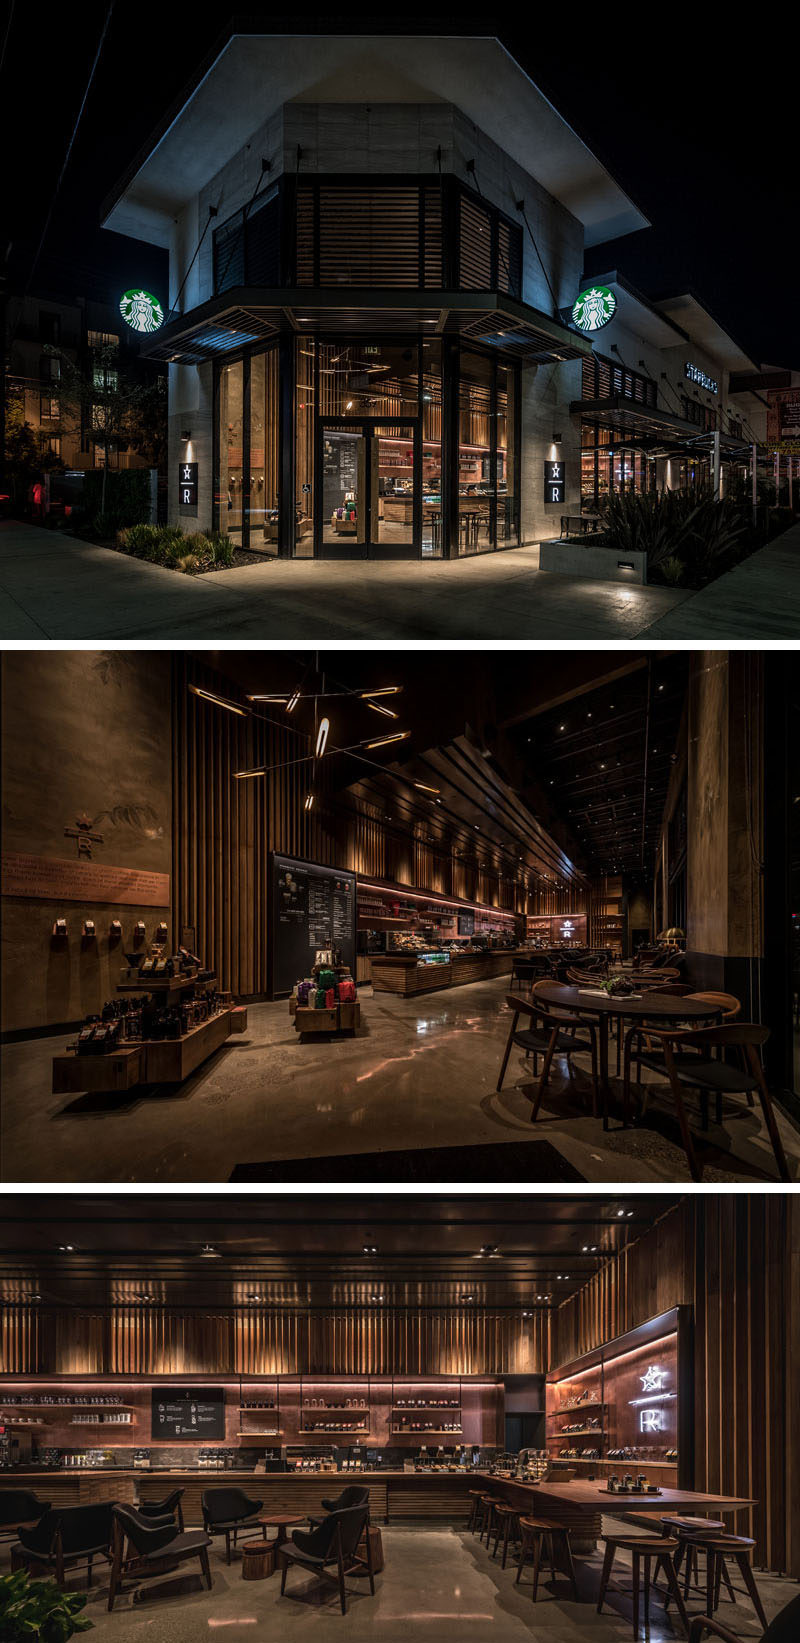 11 Starbucks Coffee Shops From Around The World // This Starbucks location on La Brea Avenue in Los Angeles features a number of unique design details including two long bars that allow for two kinds of customers - those who are running in and out, and those who want to spend some time learning about coffee and the company.